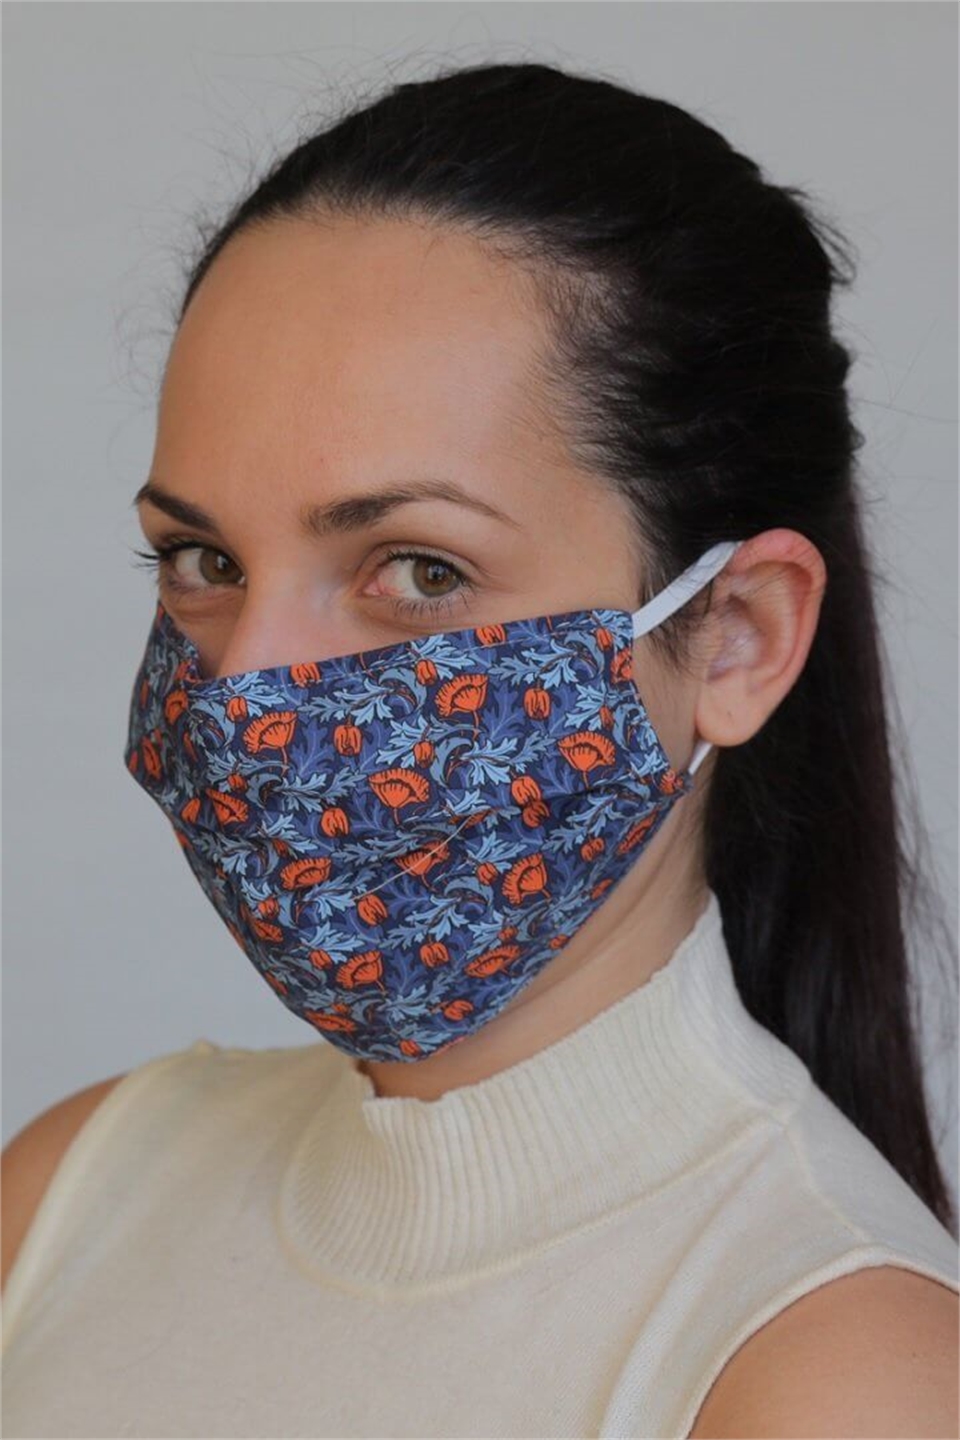 Reusable cloth masks are cost efficient way of protecting yourself from airborne viruses. It should be washed regularly